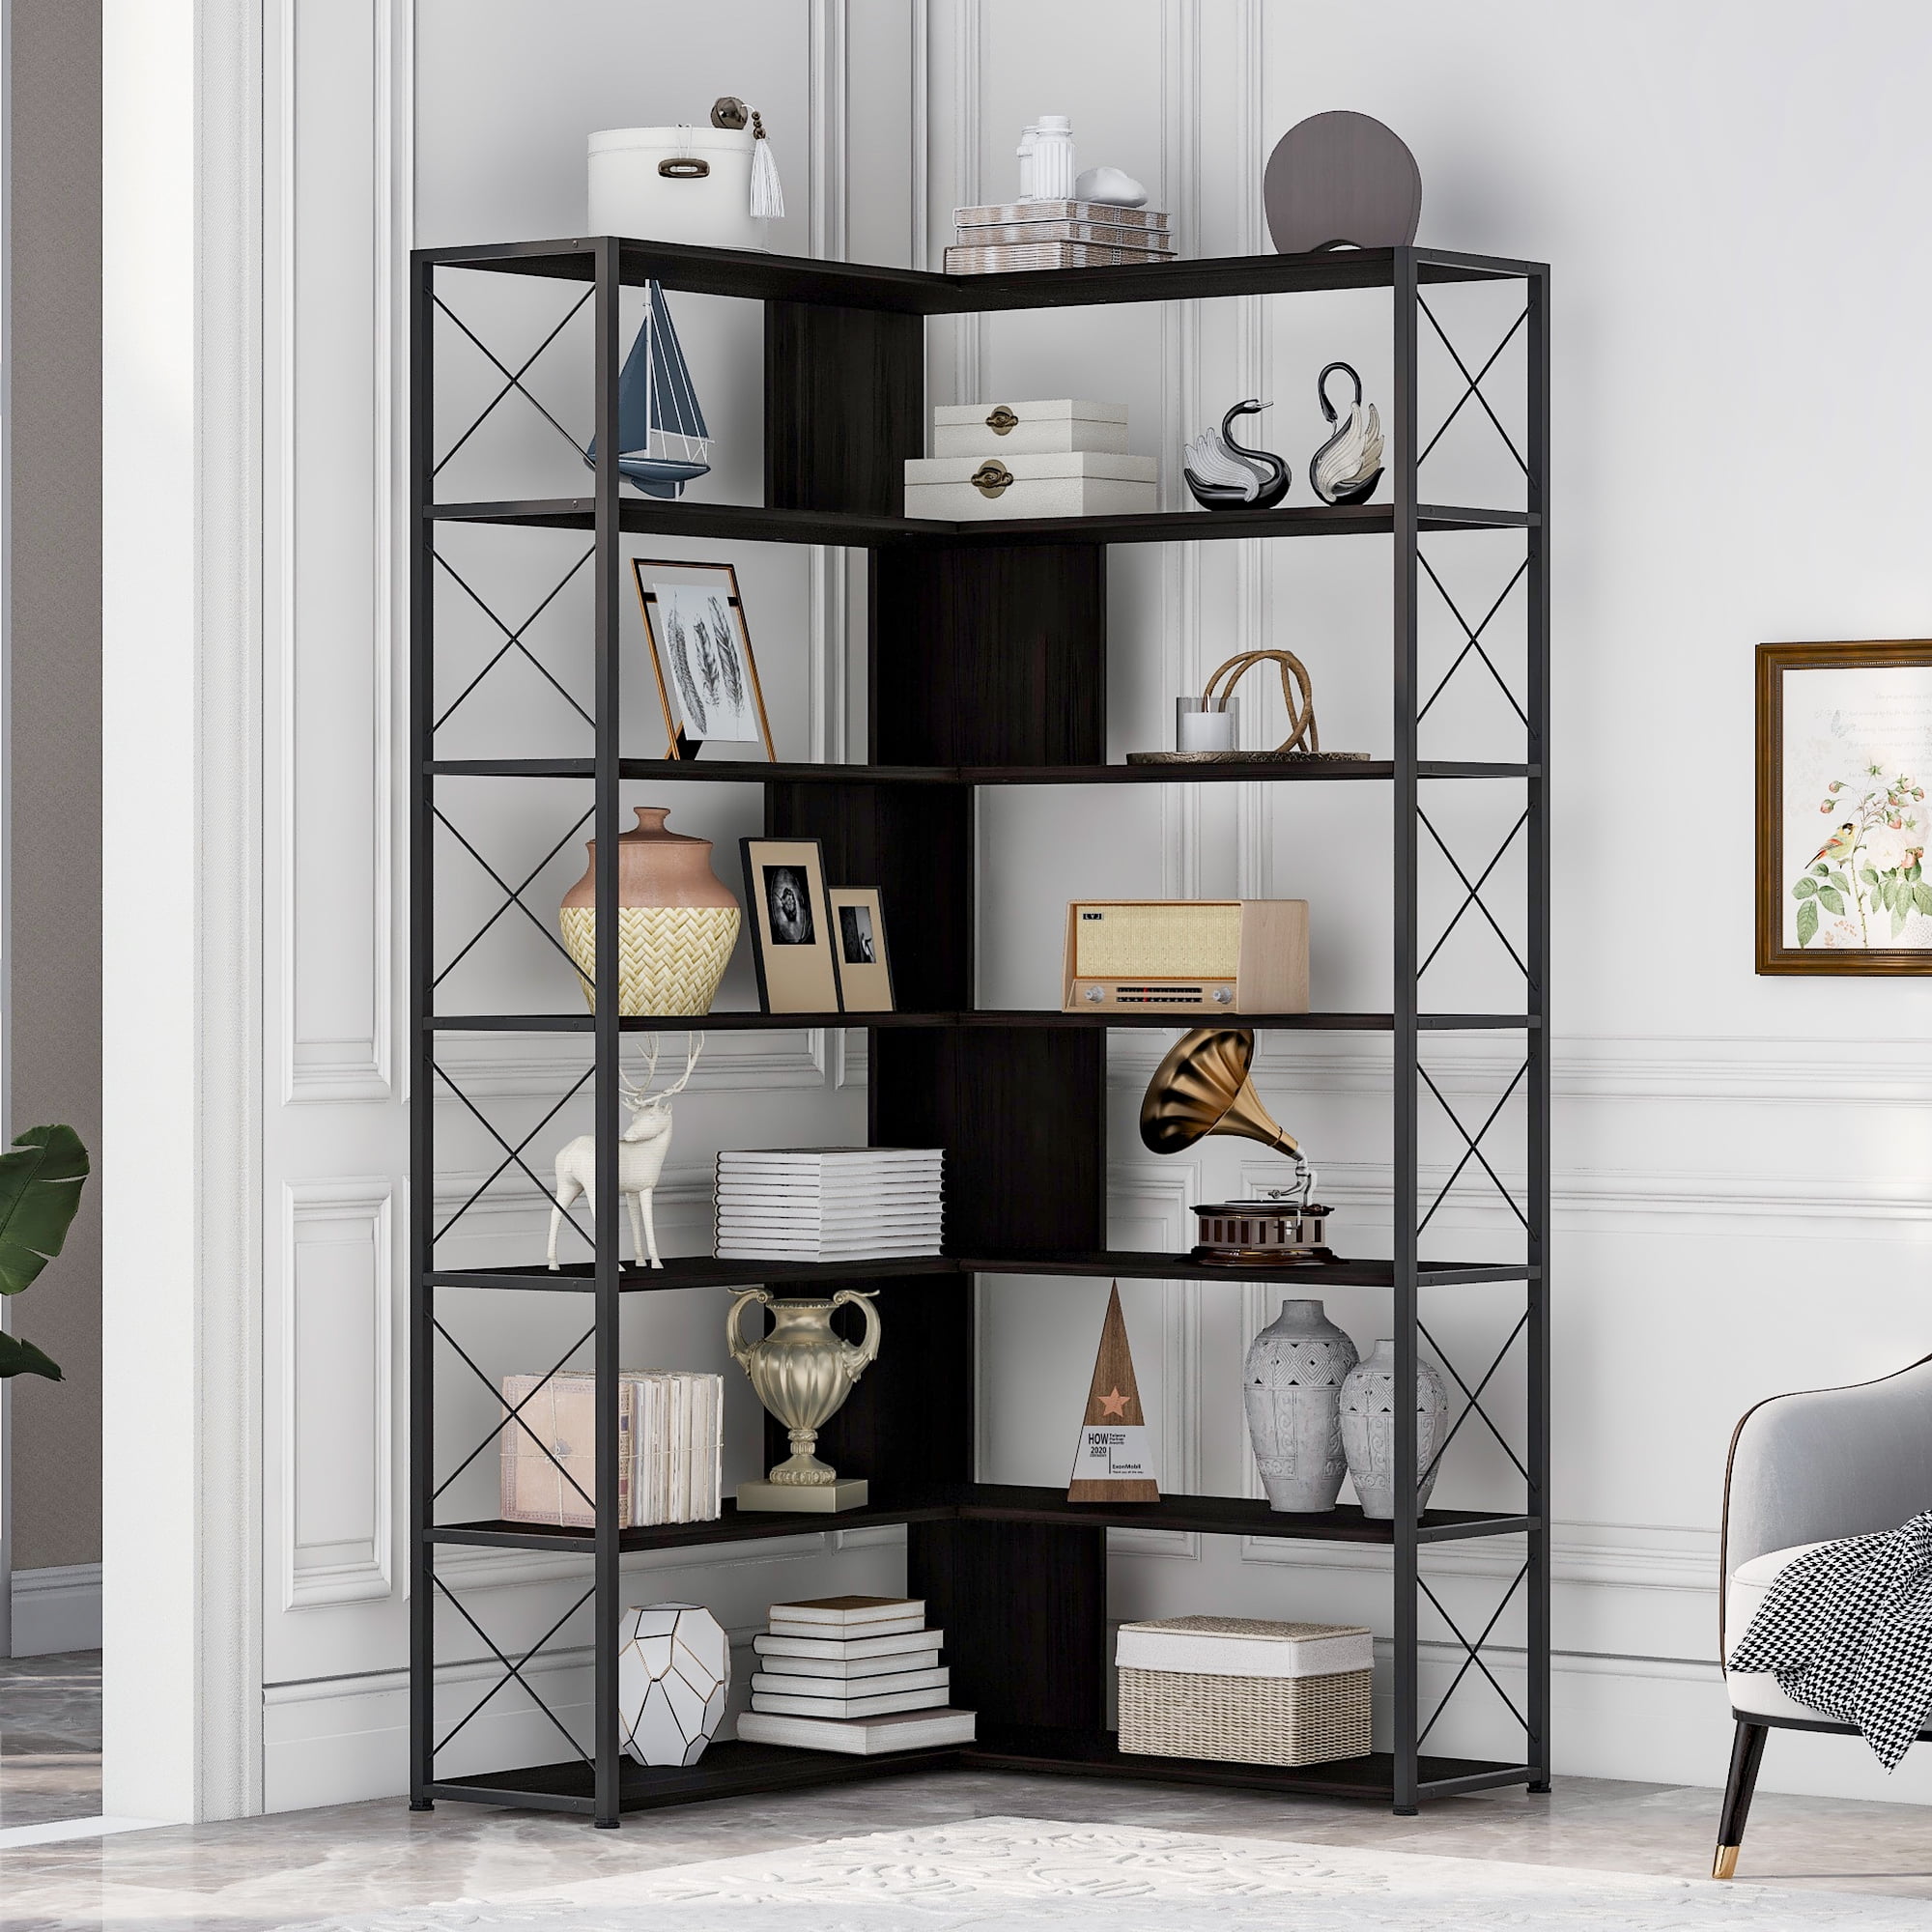 Details about   6 Tier Bookshelf Tall Bookcase Industrial Etagere Bookshelves w/ Metal Frame 